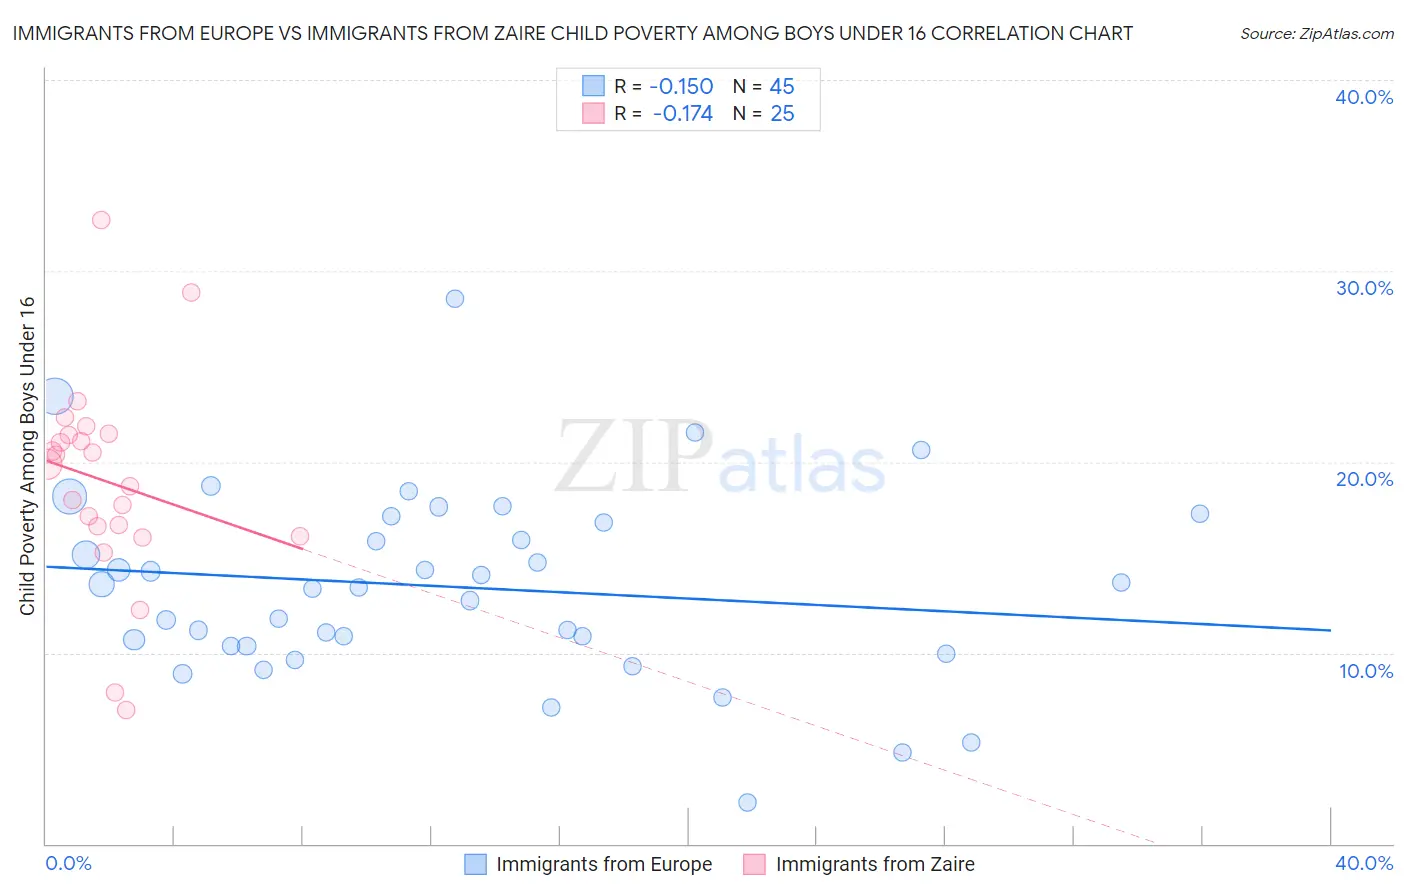 Immigrants from Europe vs Immigrants from Zaire Child Poverty Among Boys Under 16